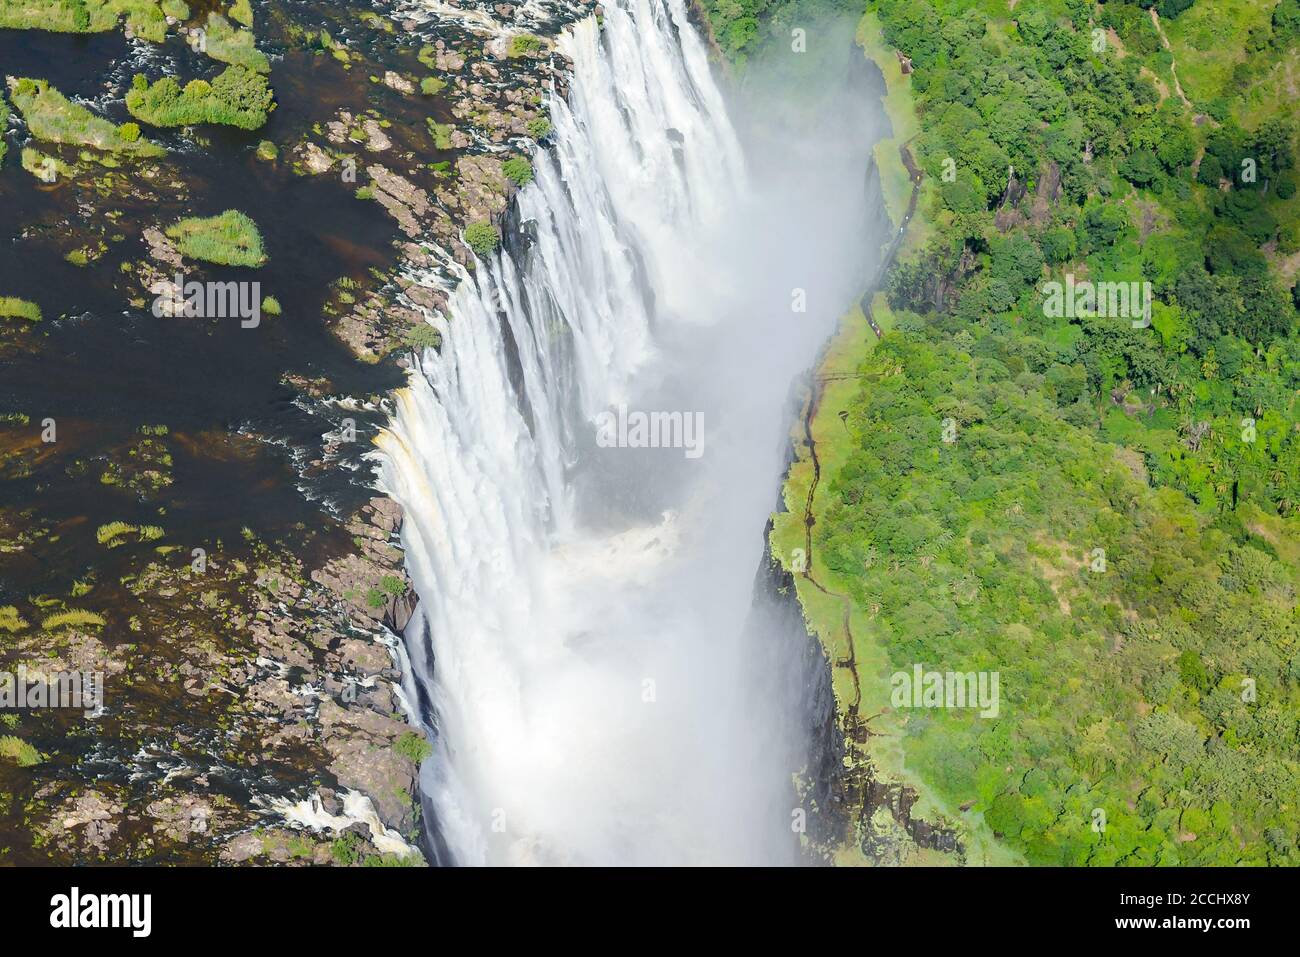 Aerial view of Victoria Falls located Zimbabwe and Zambia border. Zambezi River waterfall in Africa. Helicopter view of the fall. Stock Photo